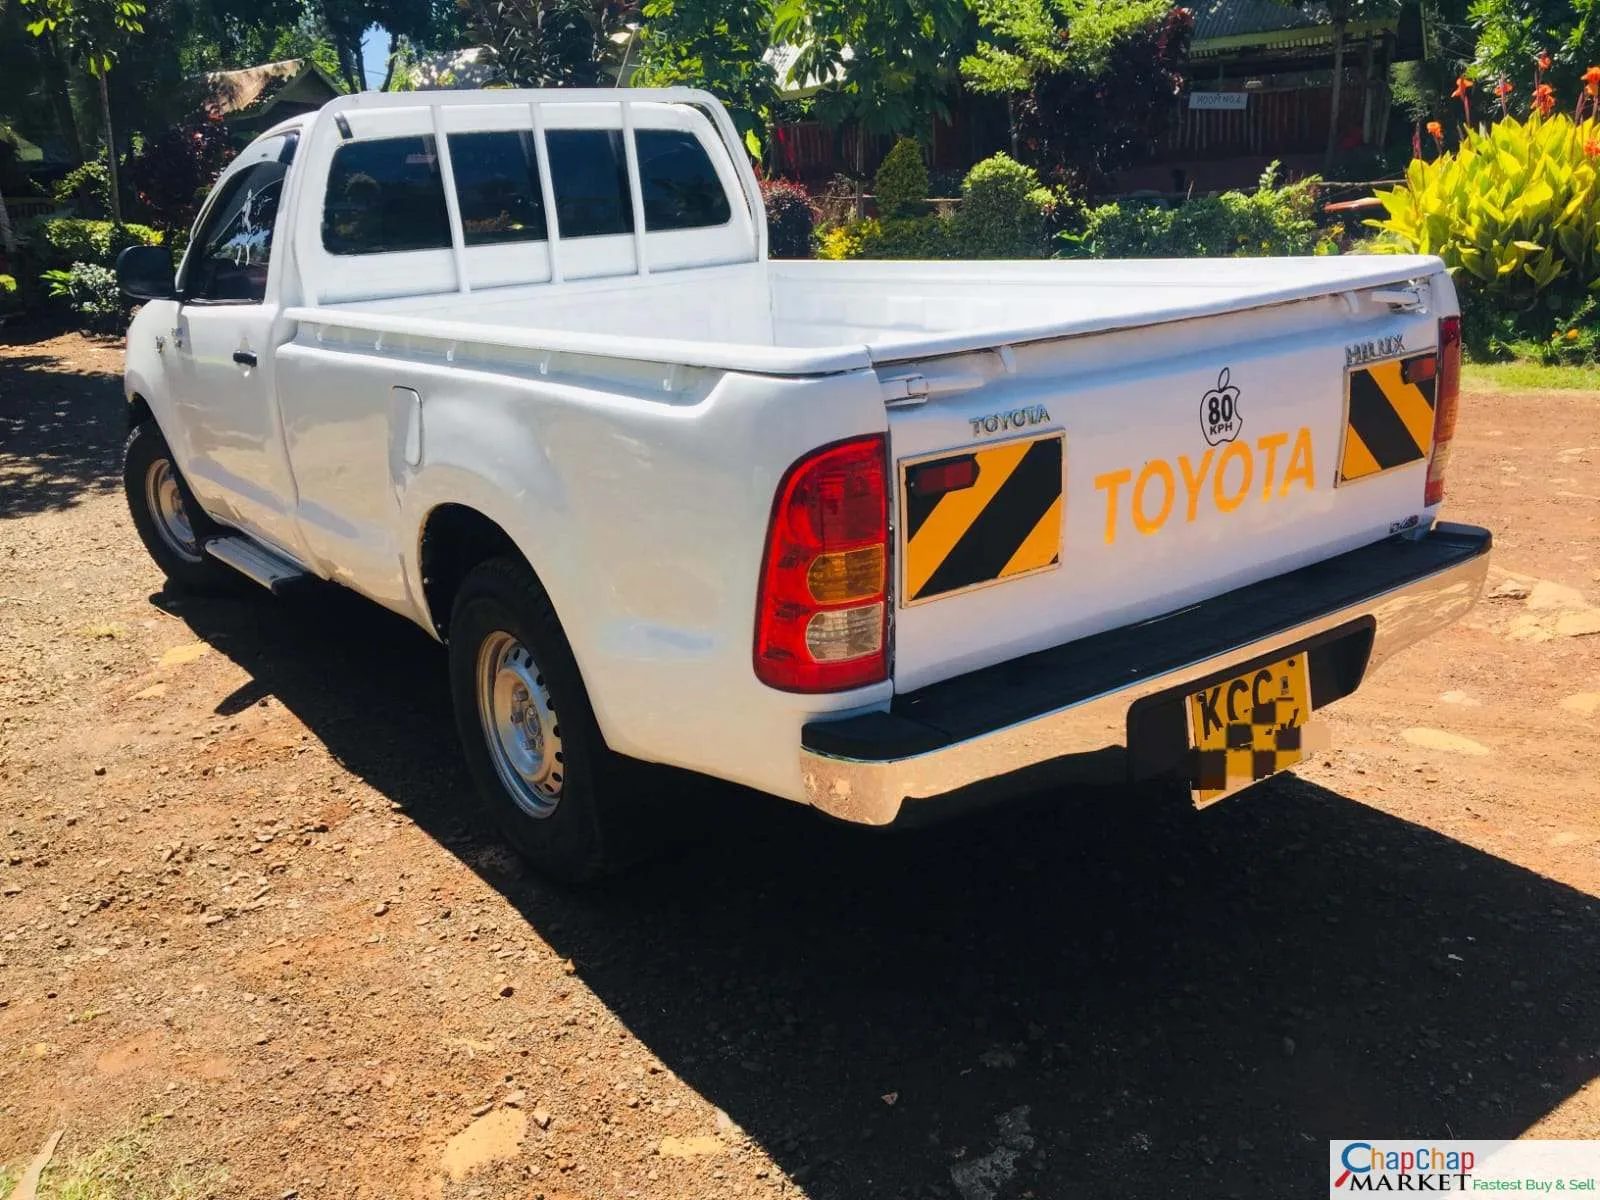 Toyota Hilux Kenya single cab You Paul 40% Deposit trade in OK Toyota Hilux for sale in kenya hire purchase installments EXCLUSIVE